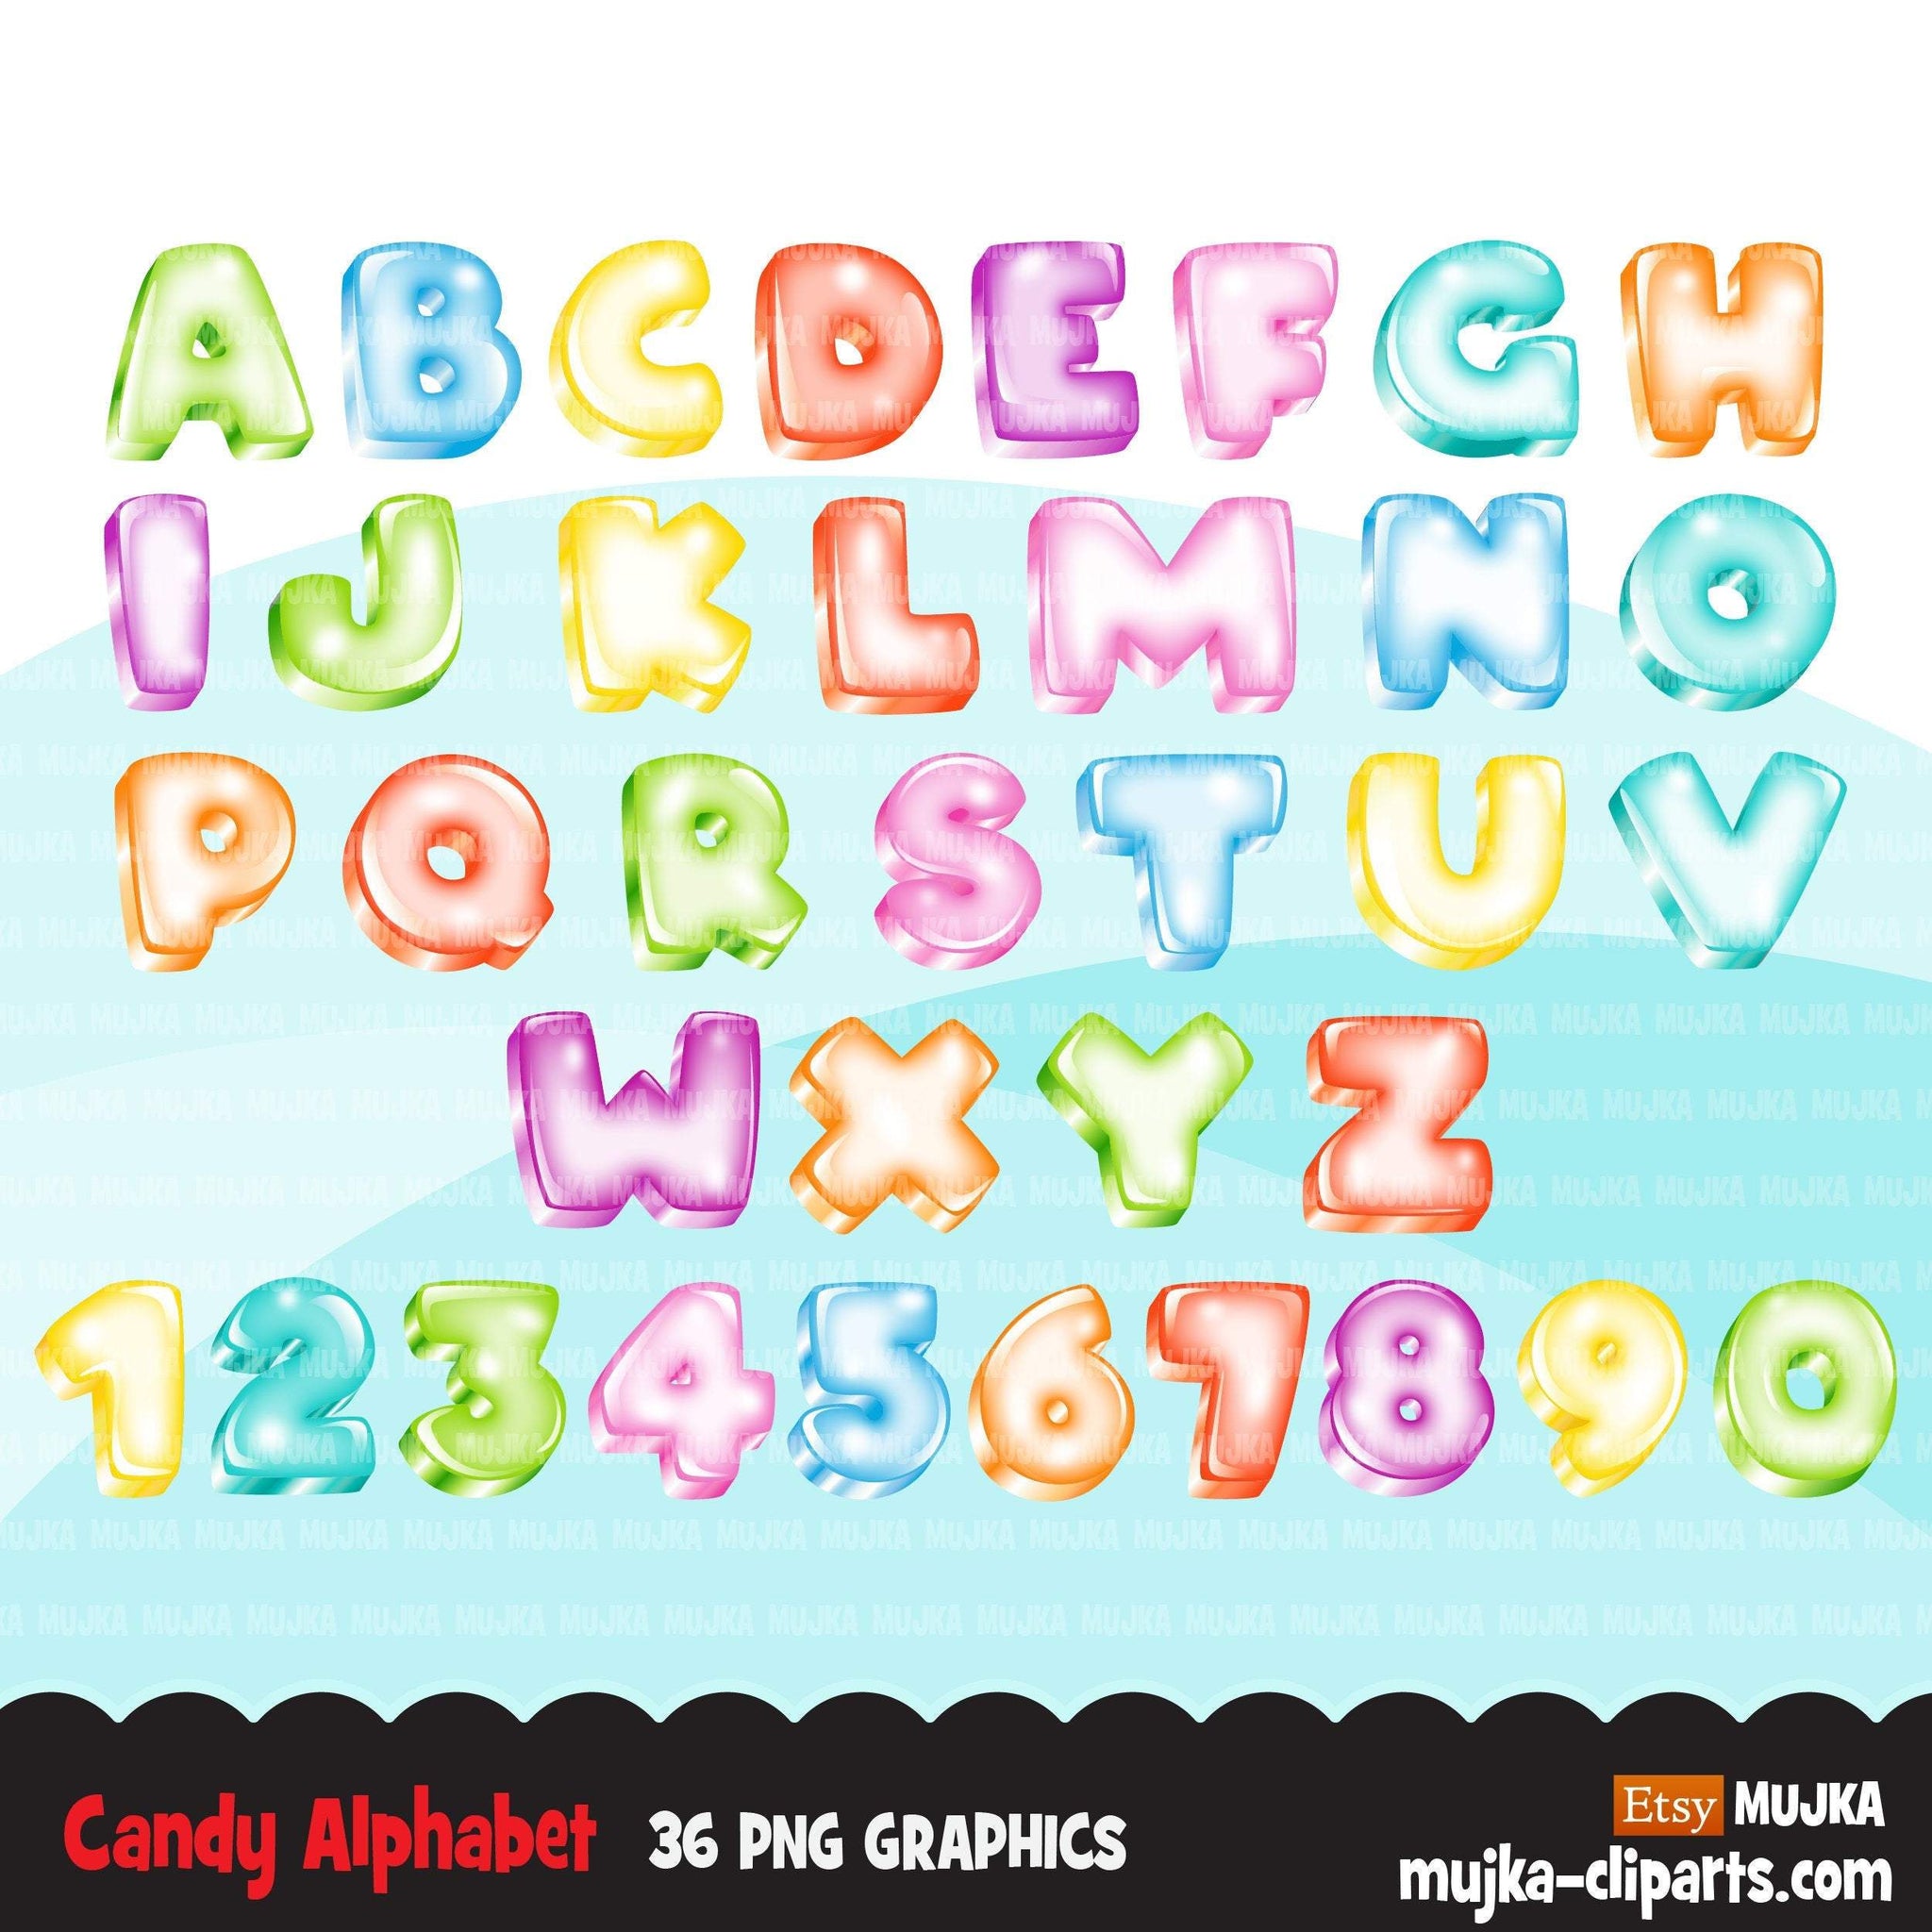 Candy Alphabet Clipart, candy land glossy glass pastel, boy girl birthday, baby shower letters and numbers, PNG graphics